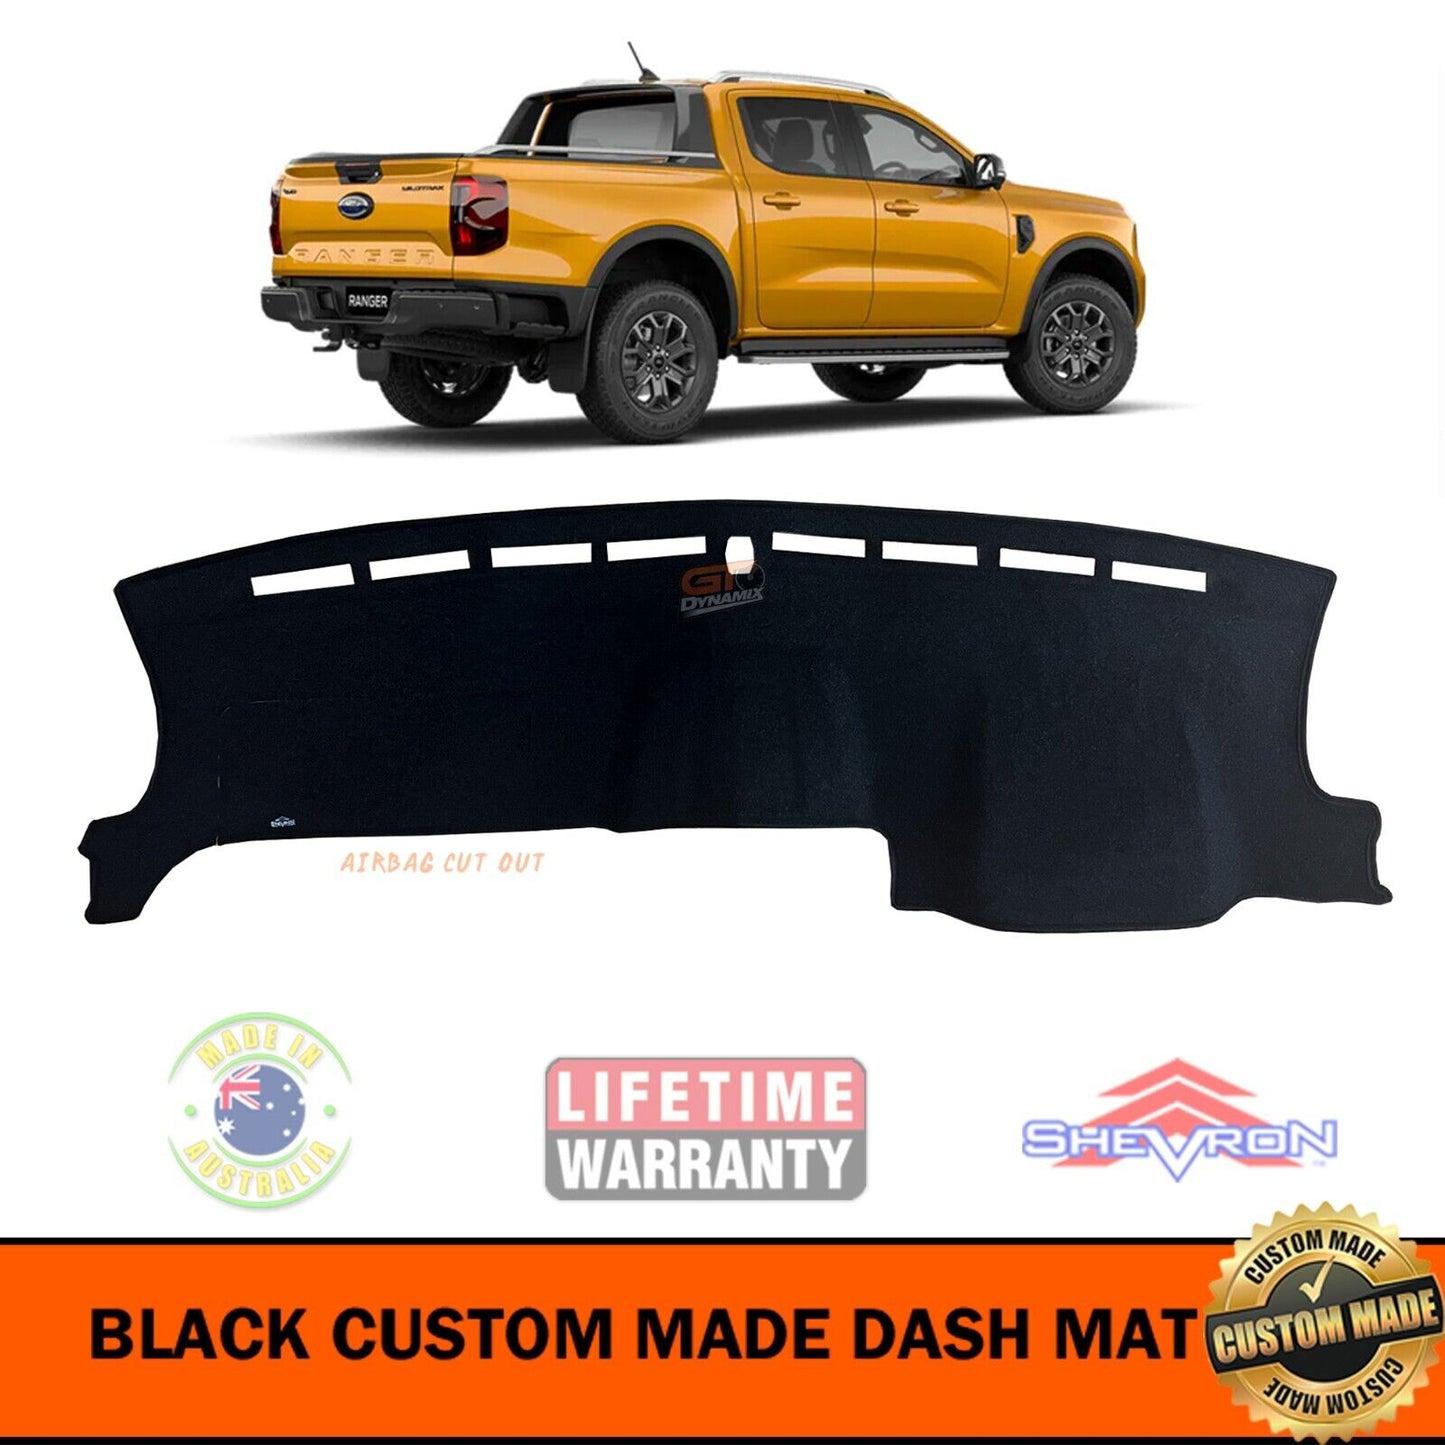 Tuff HD TRADE Canvas Seat Covers 2 Row + Dash Mat For Ford Ranger Next Gen WILDTRACK DM1650 Black